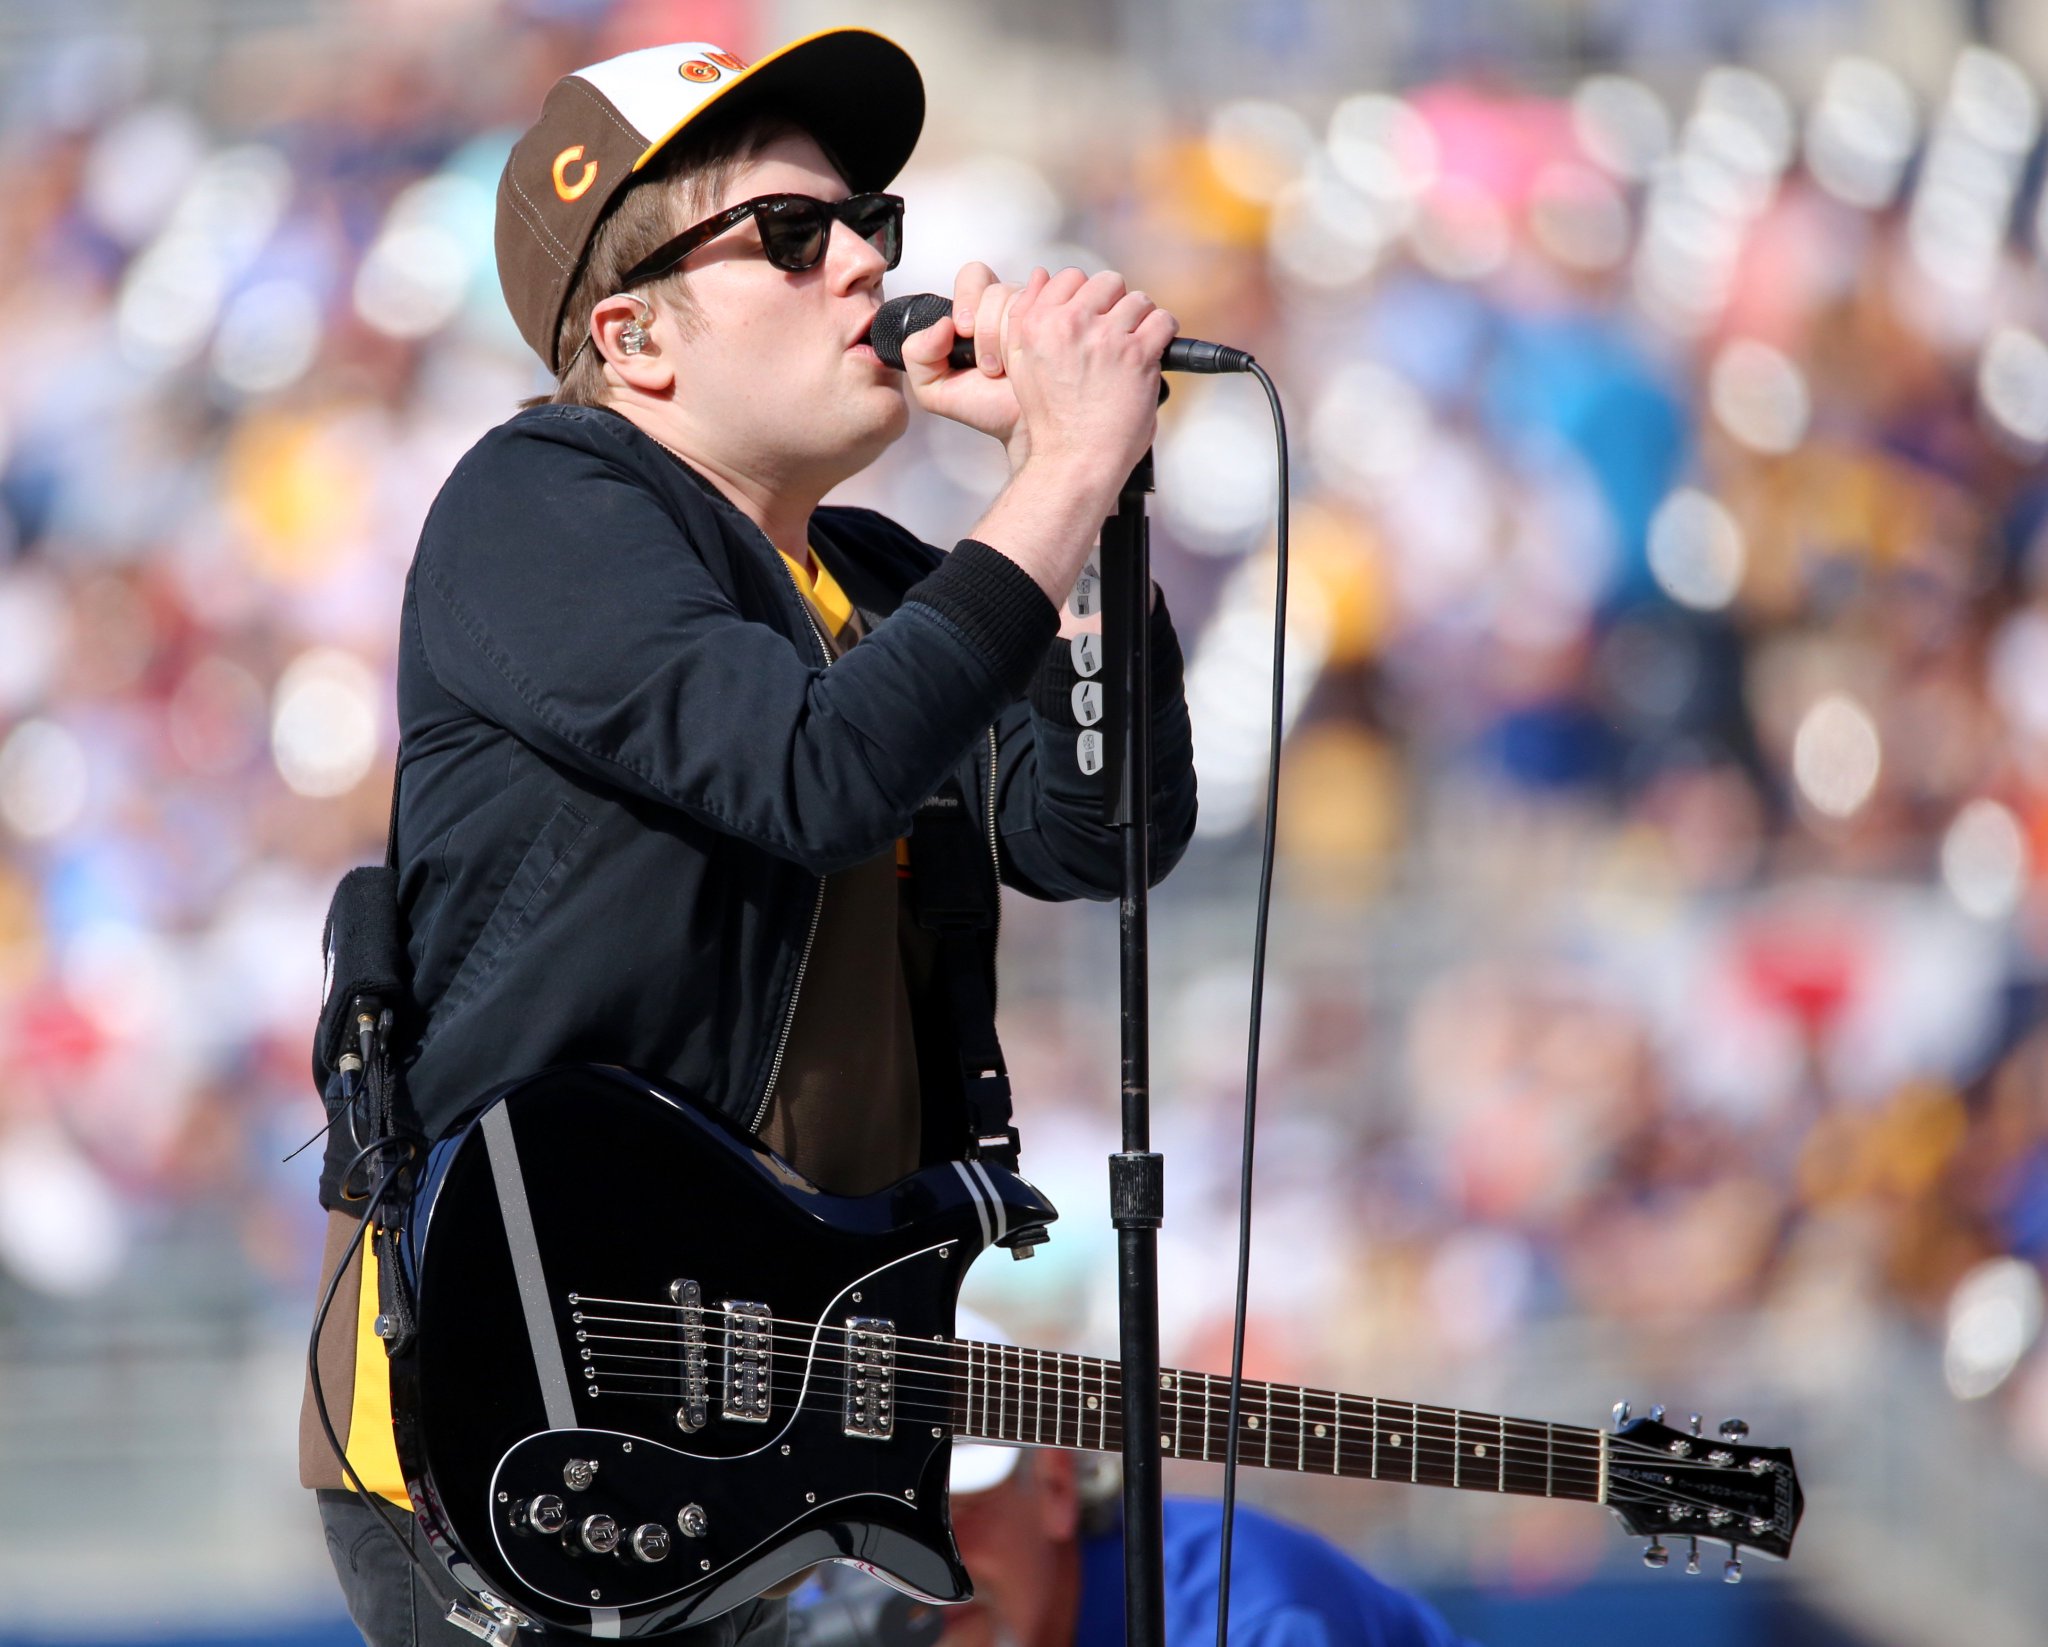 Happy birthday to Patrick Stump of Fall Out Boy!  